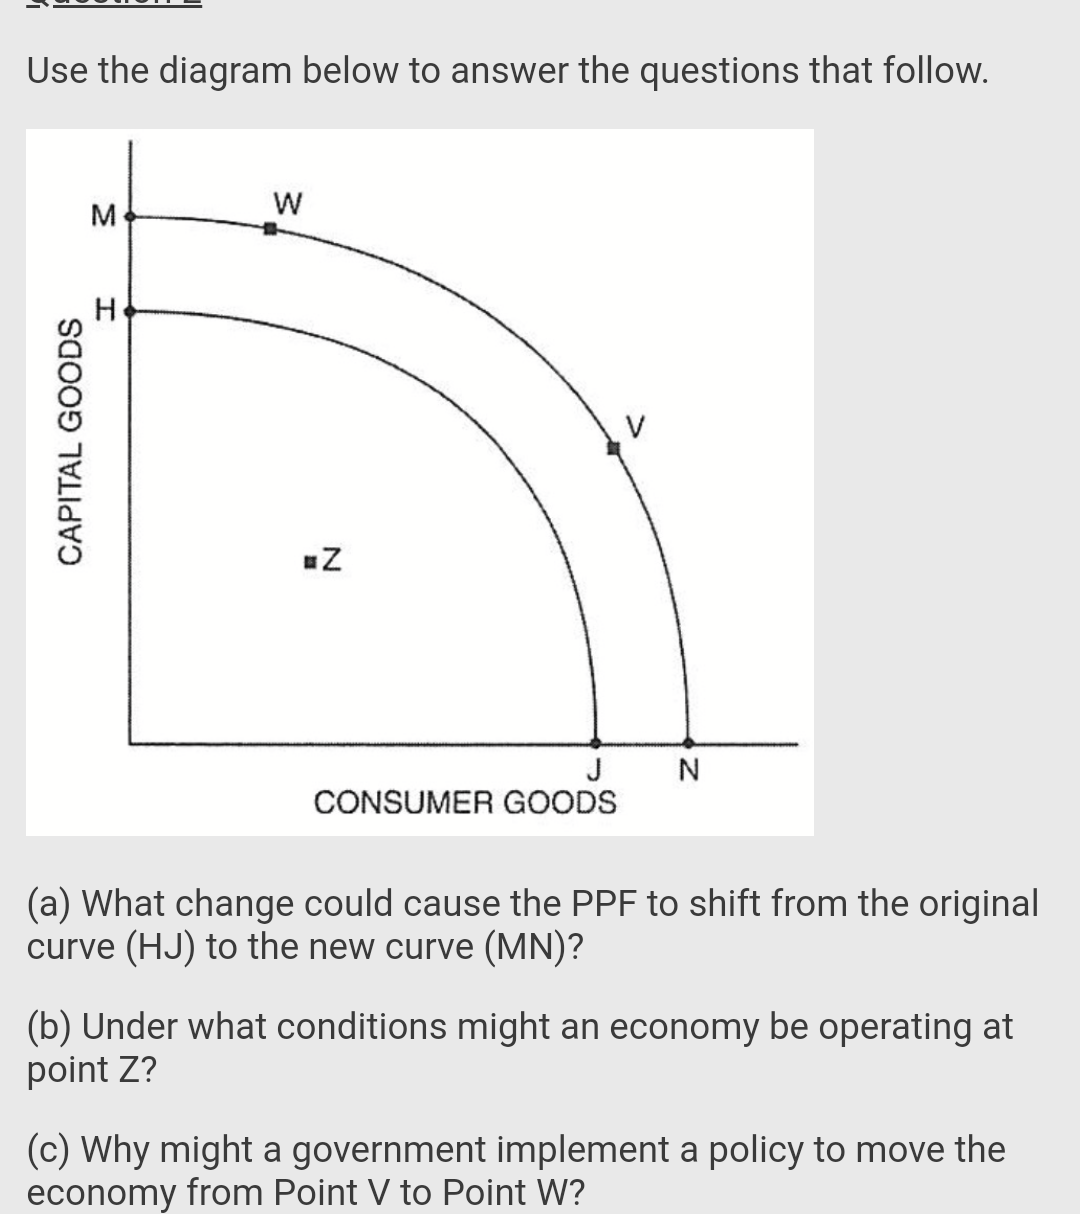 Use the diagram below to answer the questions that follow.
M
H
J
CONSUMER GOODS
(a) What change could cause the PPF to shift from the original
curve (HJ) to the new curve (MN)?
(b) Under what conditions might an economy be operating at
point Z?
(c) Why might a government implement a policy to move the
economy from Point V to Point W?
CAPITAL GOODS
